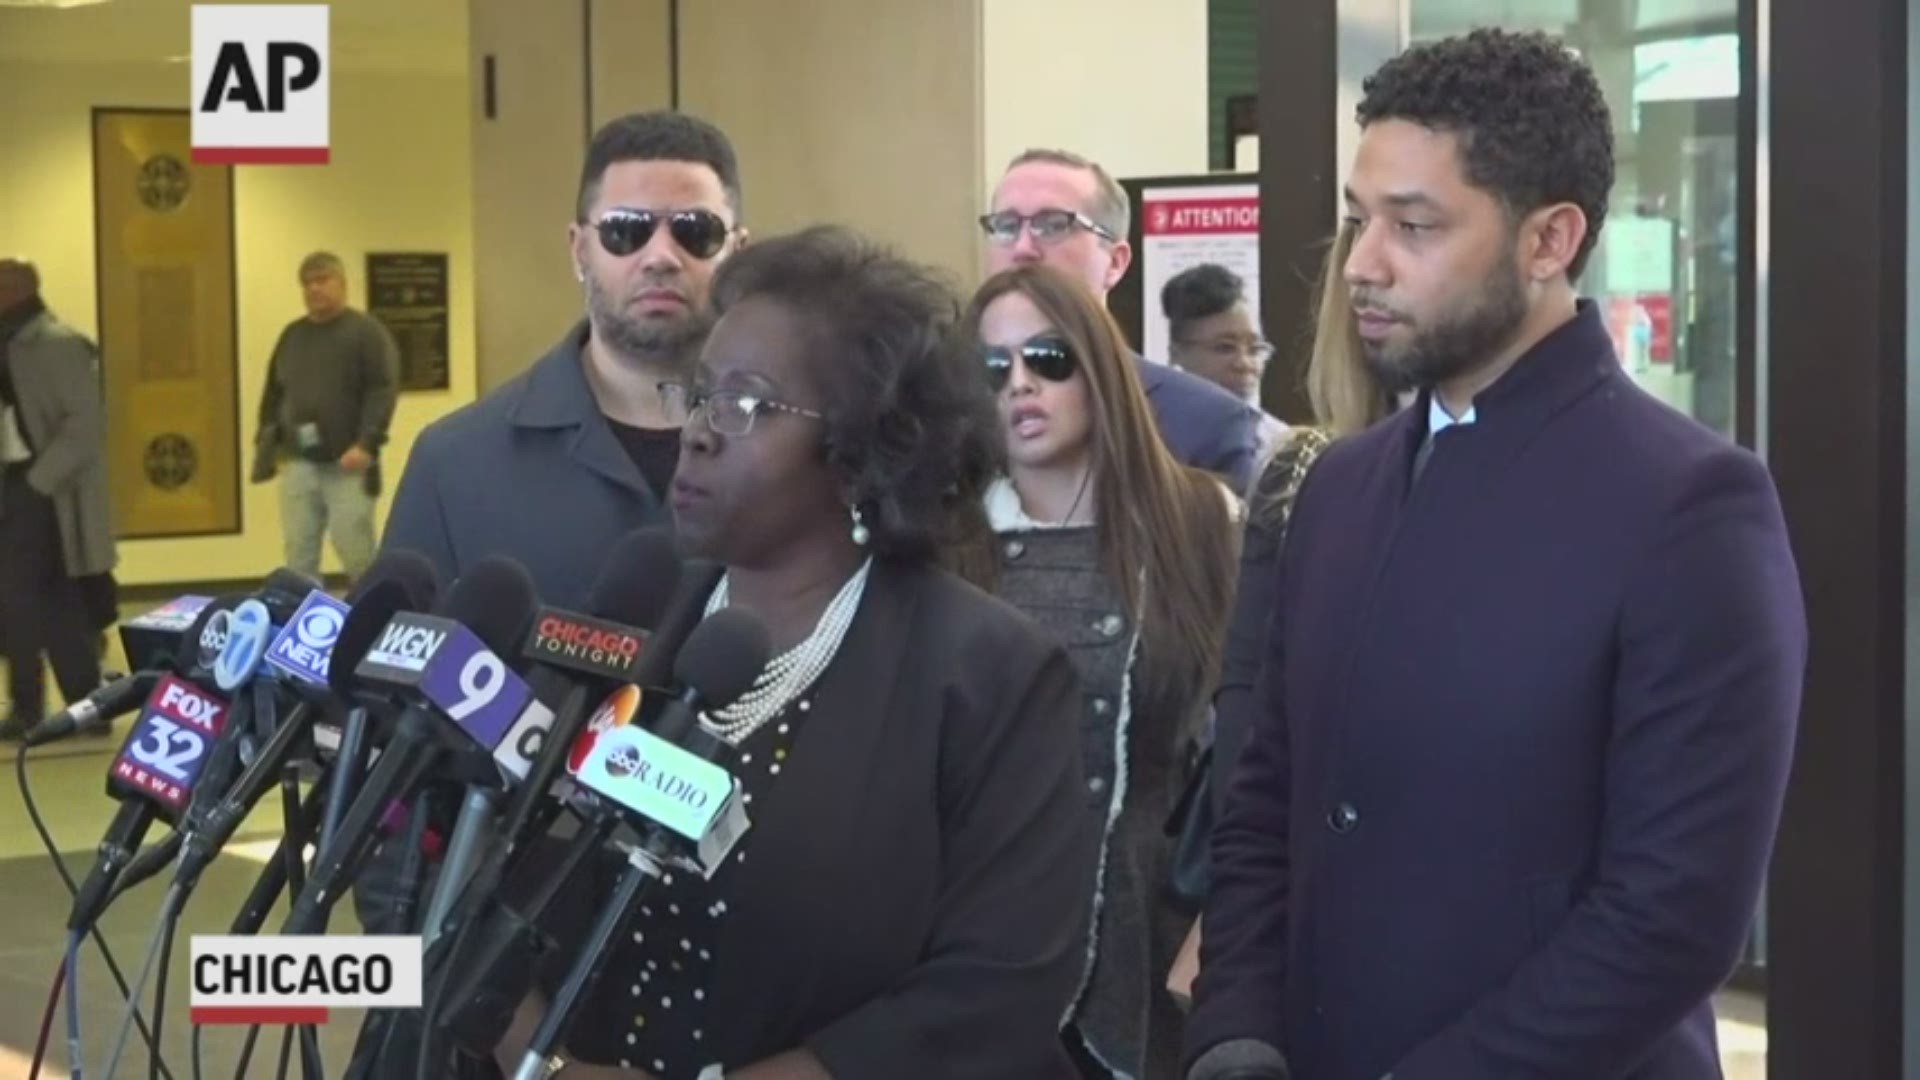 Attorneys for 'Empire' actor Jussie Smollett say charges alleging he lied to police about attack have been dropped. (AP)